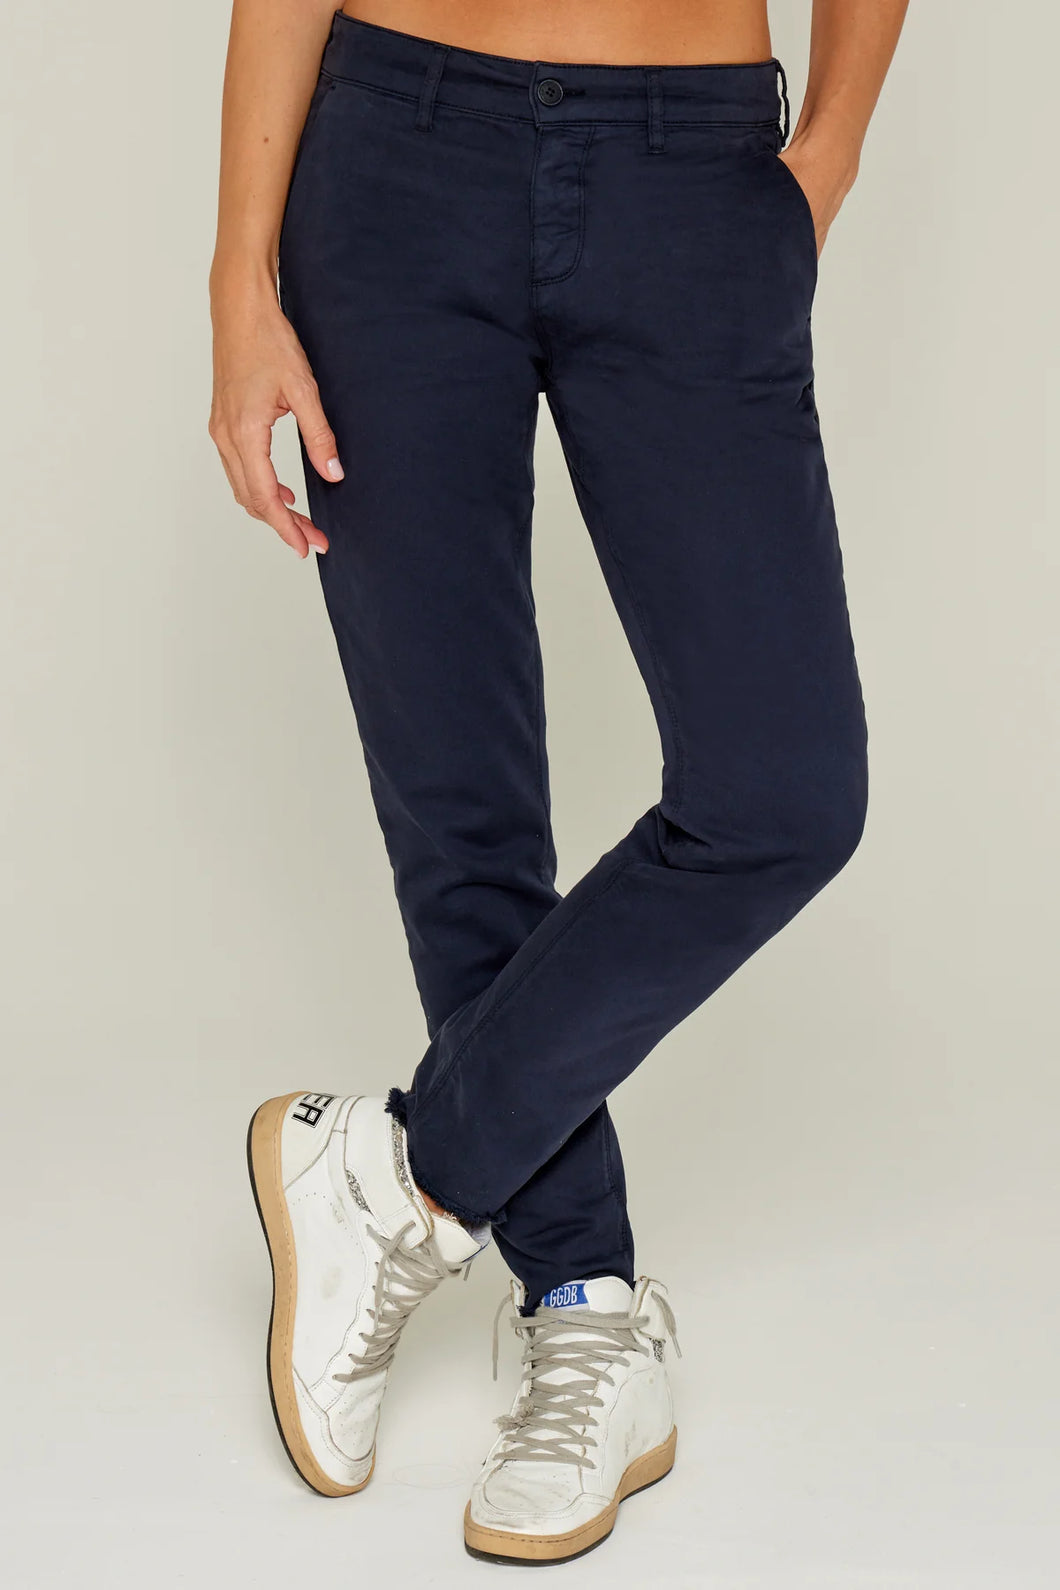 Cathy Trousers - Navy